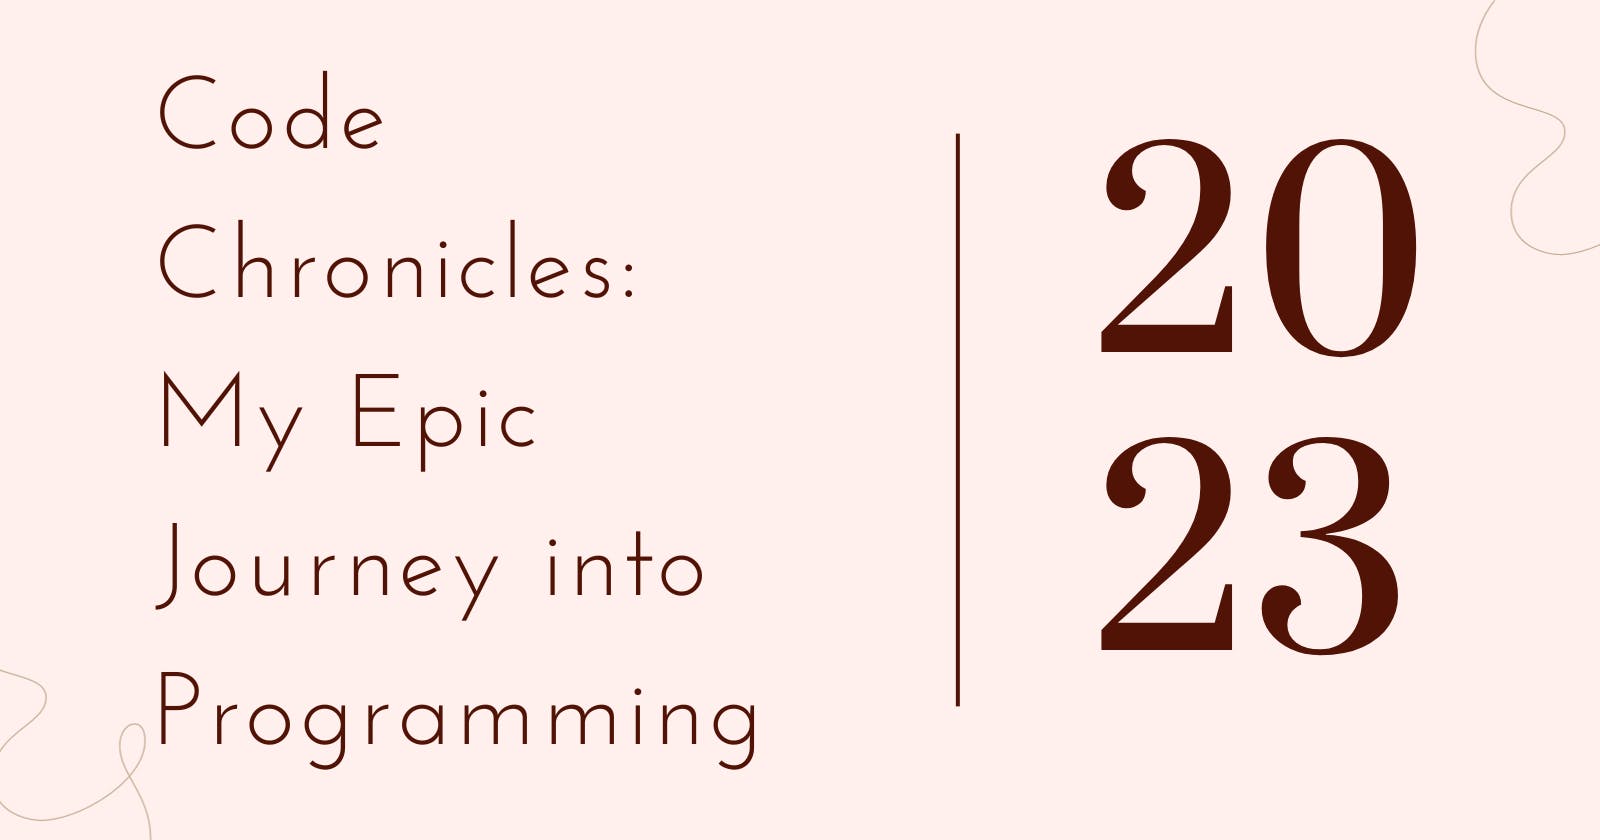 Code Chronicles: My Epic Journey into Programming - A 2023 Wrap-Up!